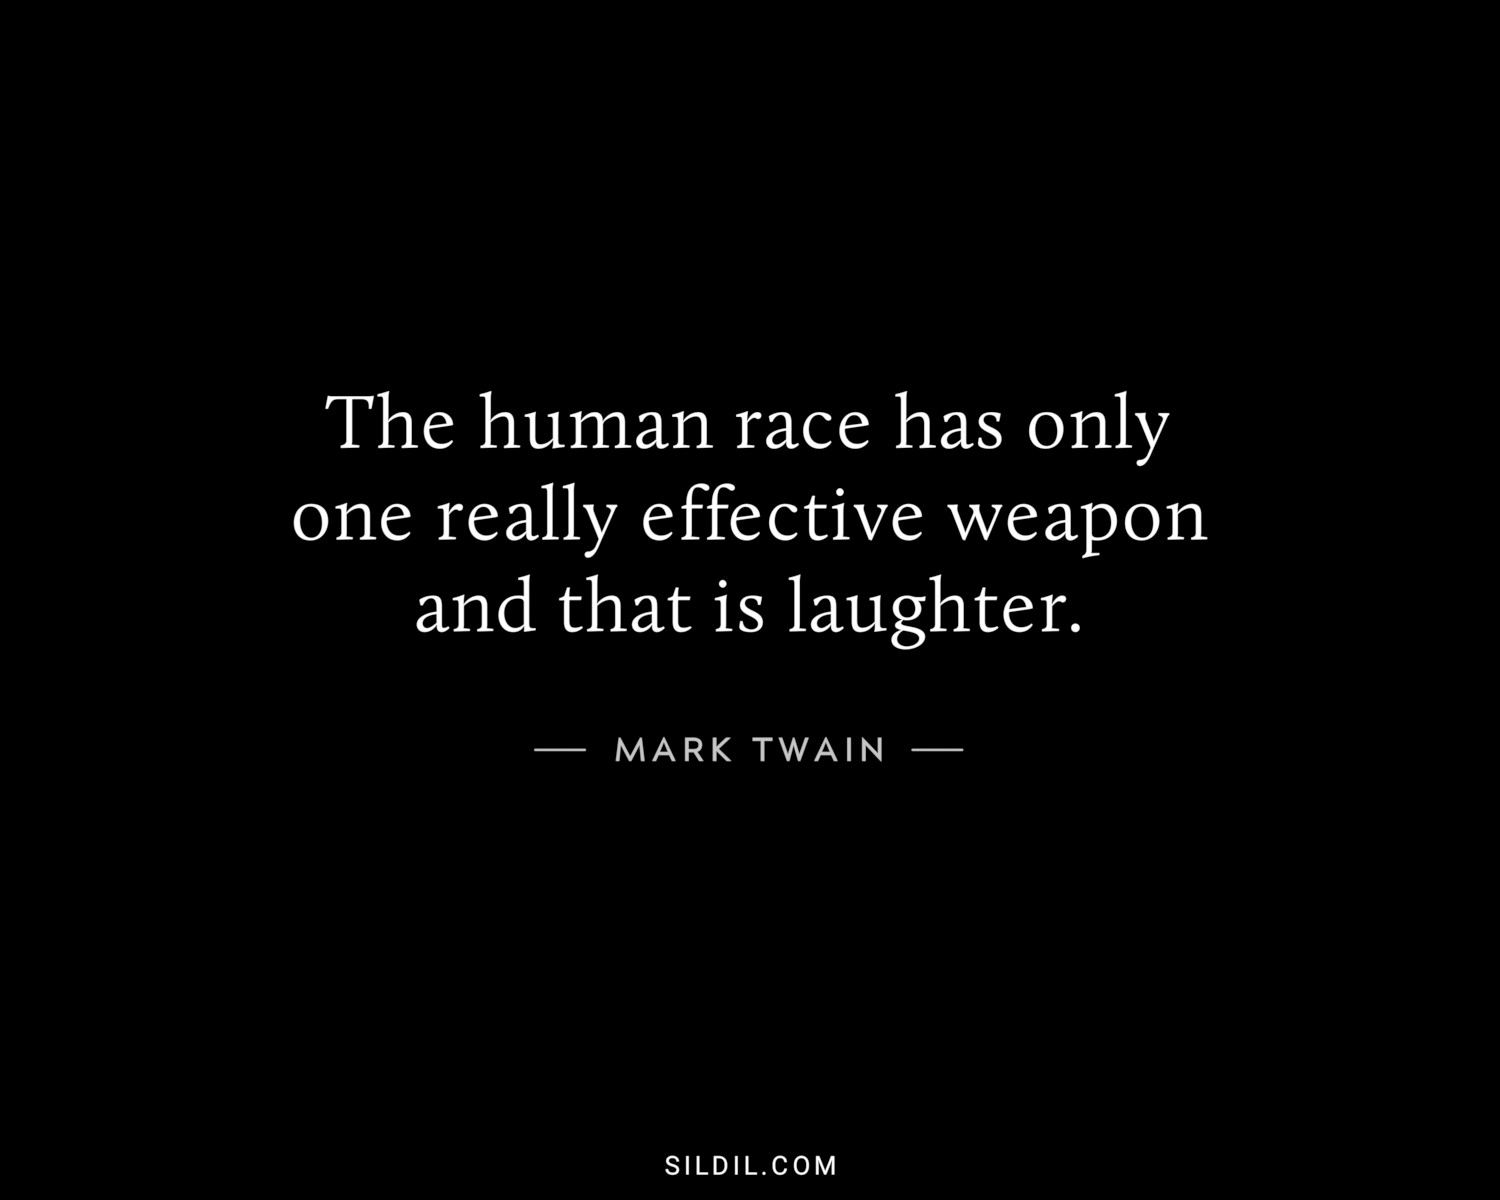 The human race has only one really effective weapon and that is laughter.